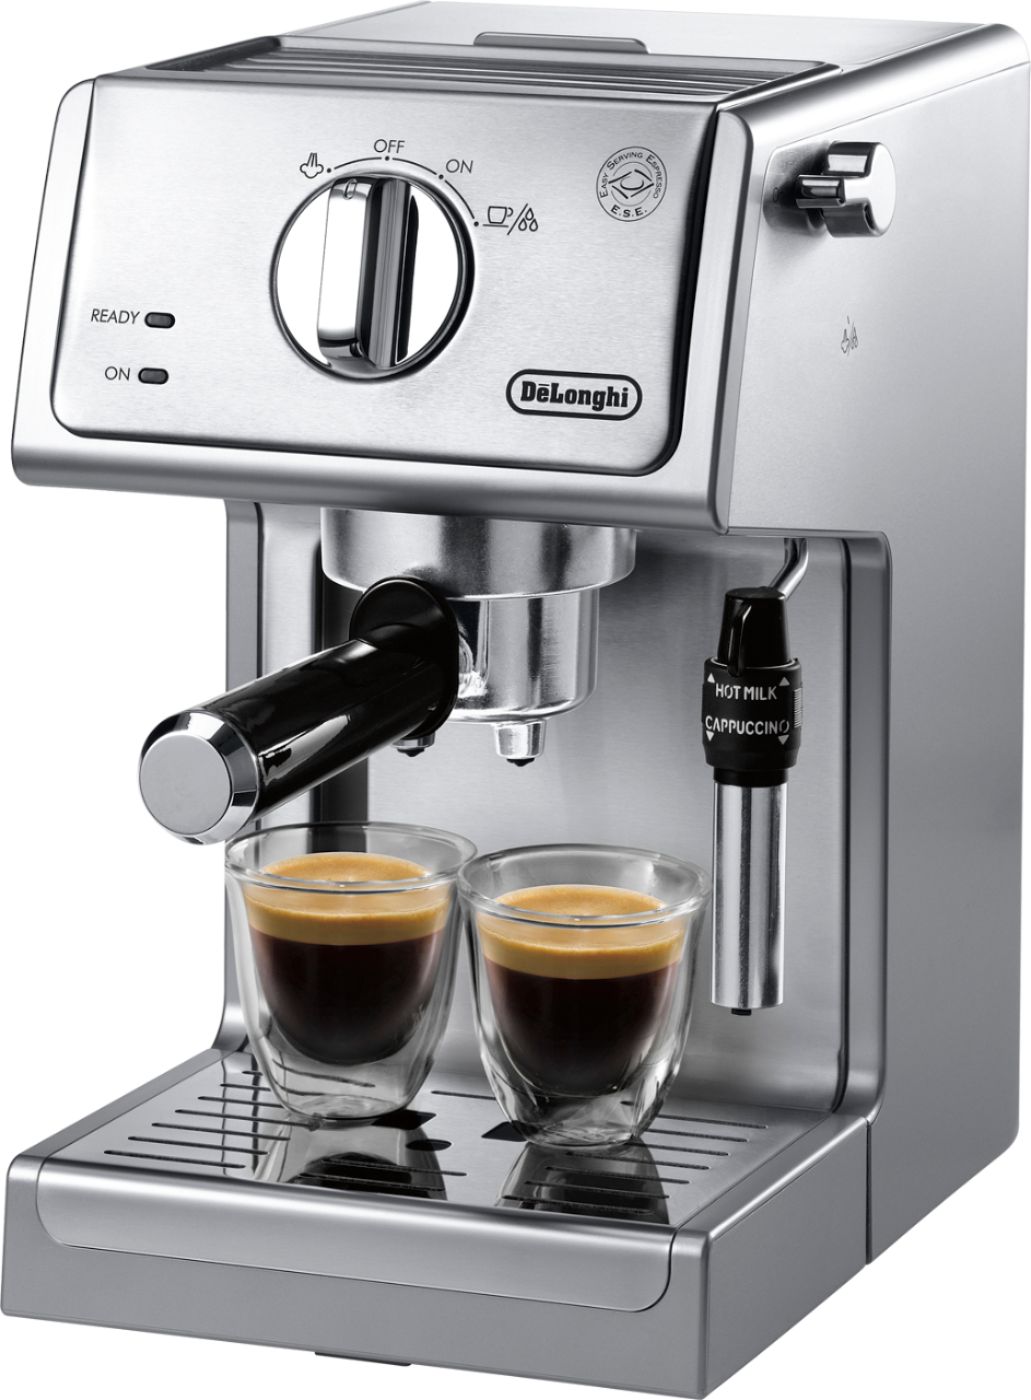 Angle View: De'Longhi - Manual Espresso Machine - Stainless Steel